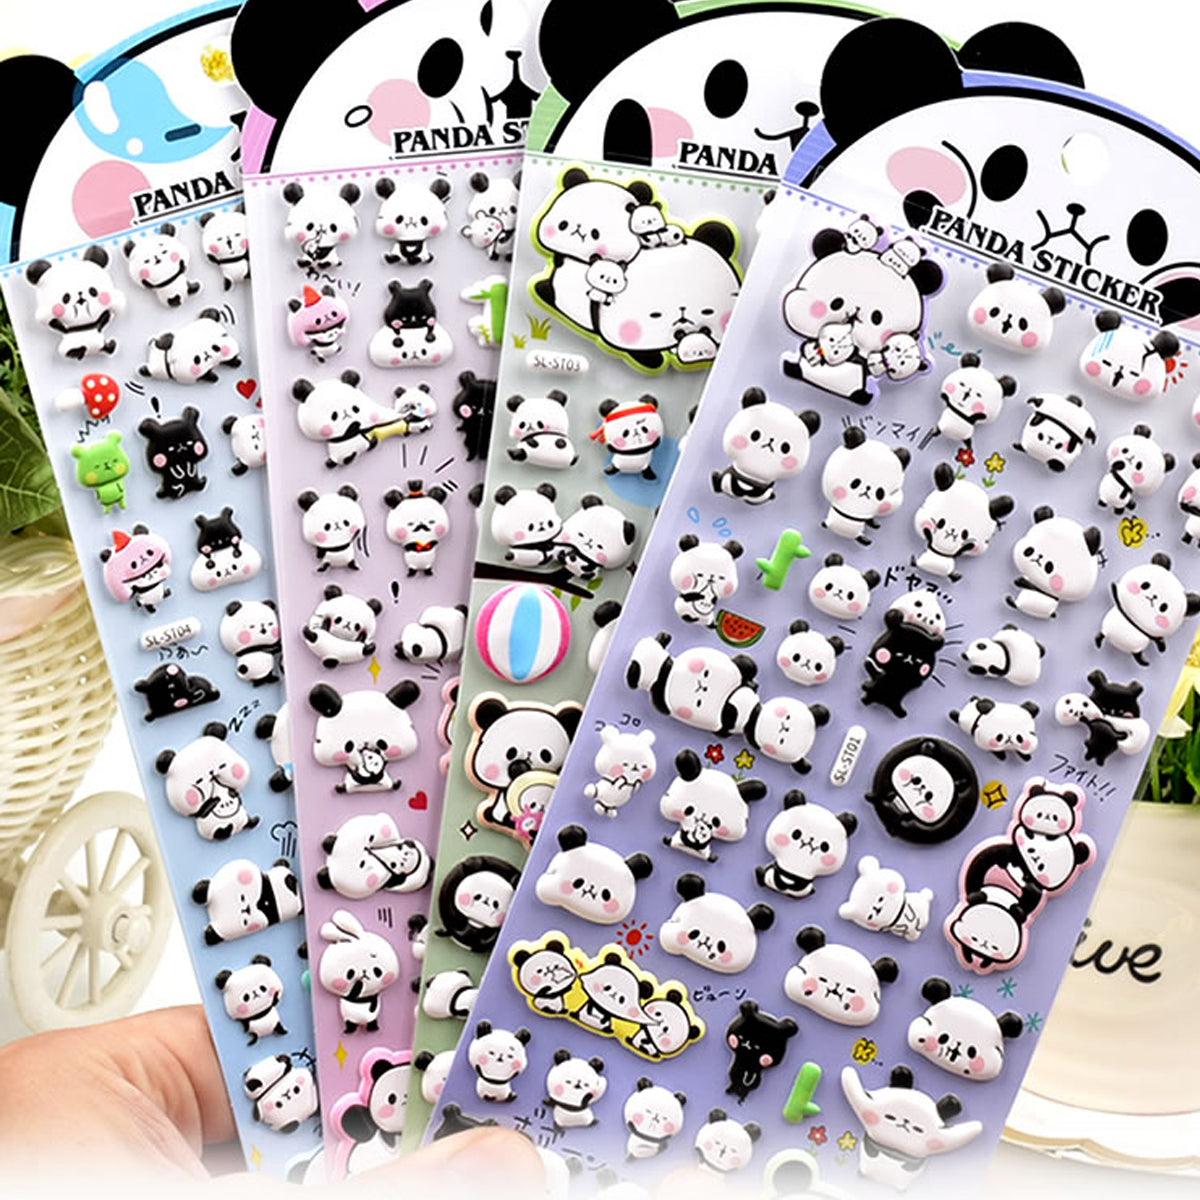 4 Packs Panda Puffy Stickers for DIY Craft Decoration 4 Packs EX Thick